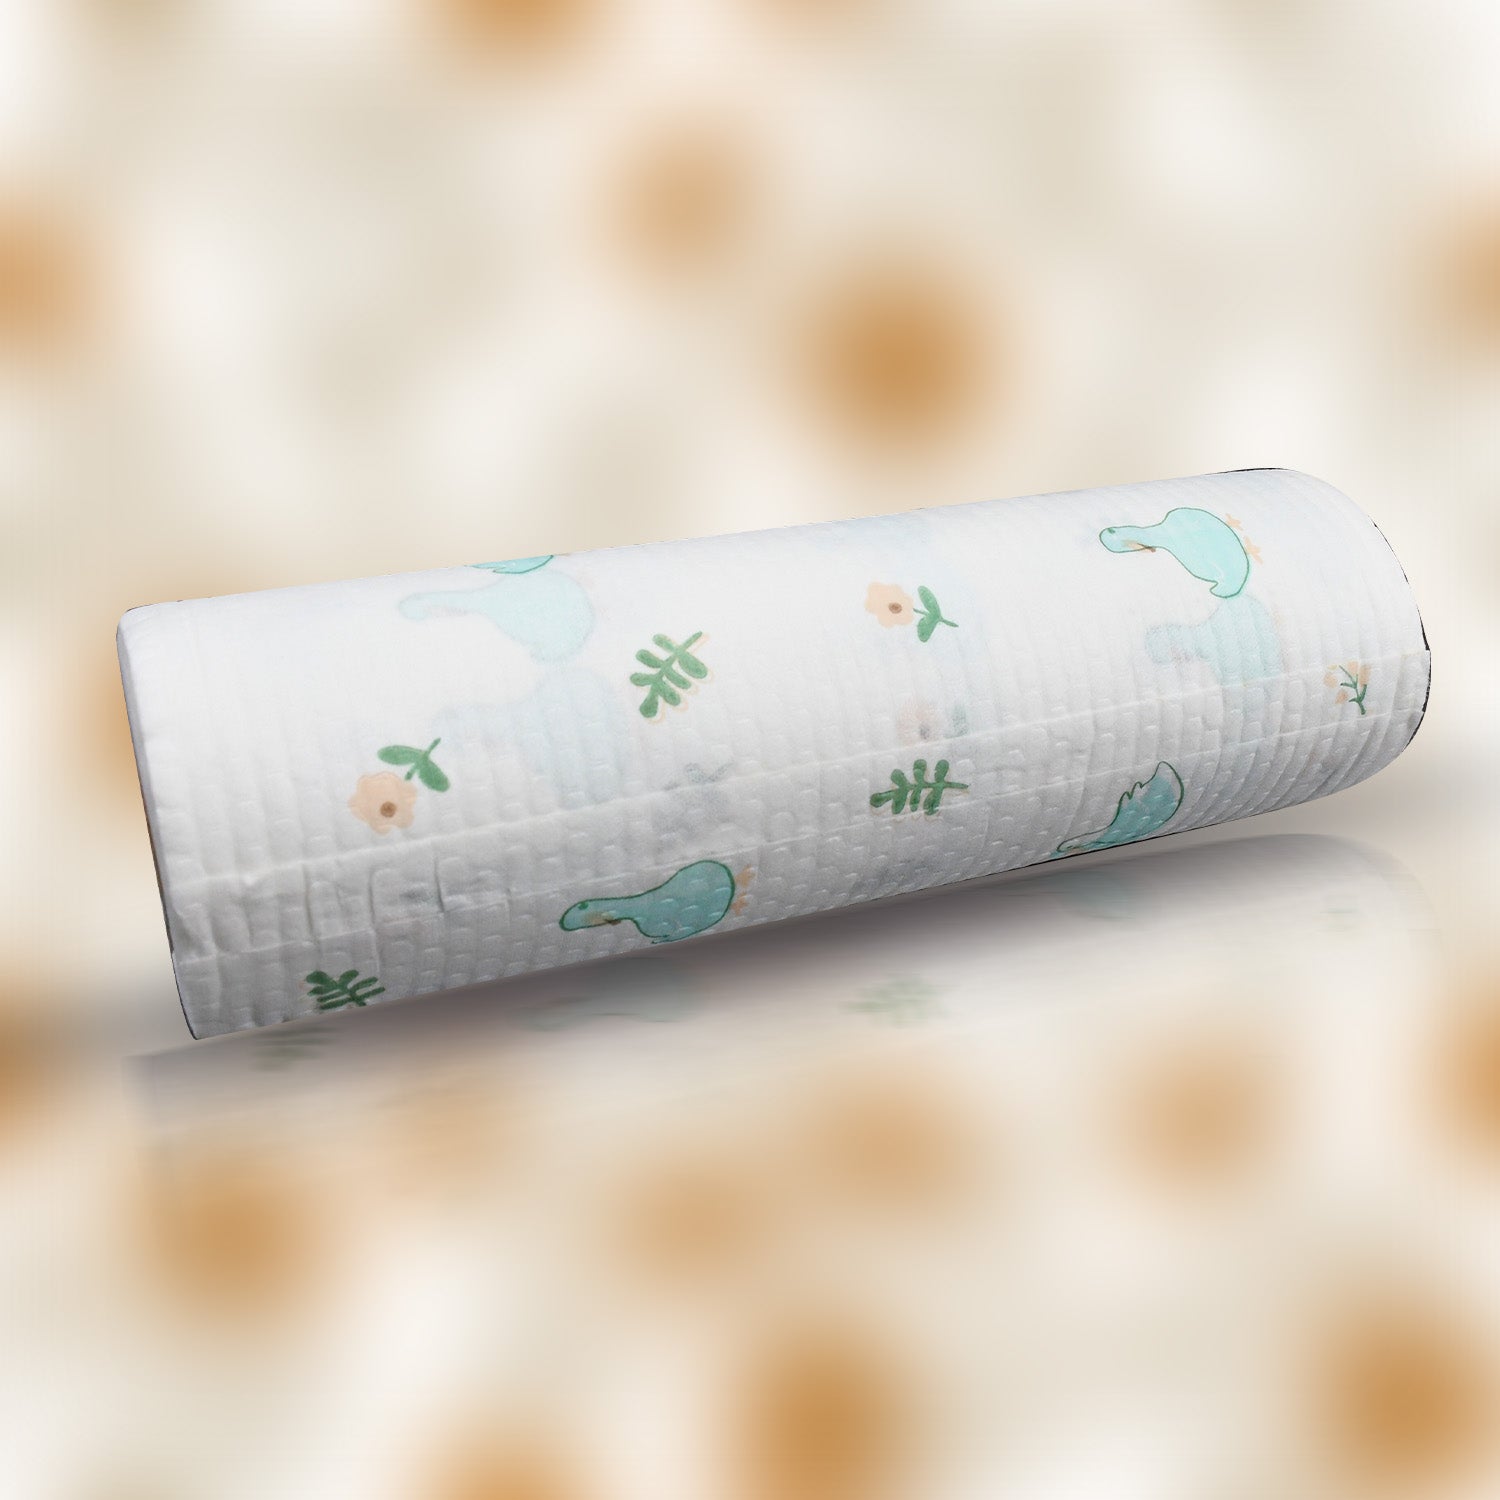 1605  Non Woven Reusable and Washable Kitchen Printed Tissue Roll Non-stick Oil Absorbing Paper Roll Kitchen Special Paper Towel Wipe Paper Dish Cloth Cleaning Cloth 45 sheets